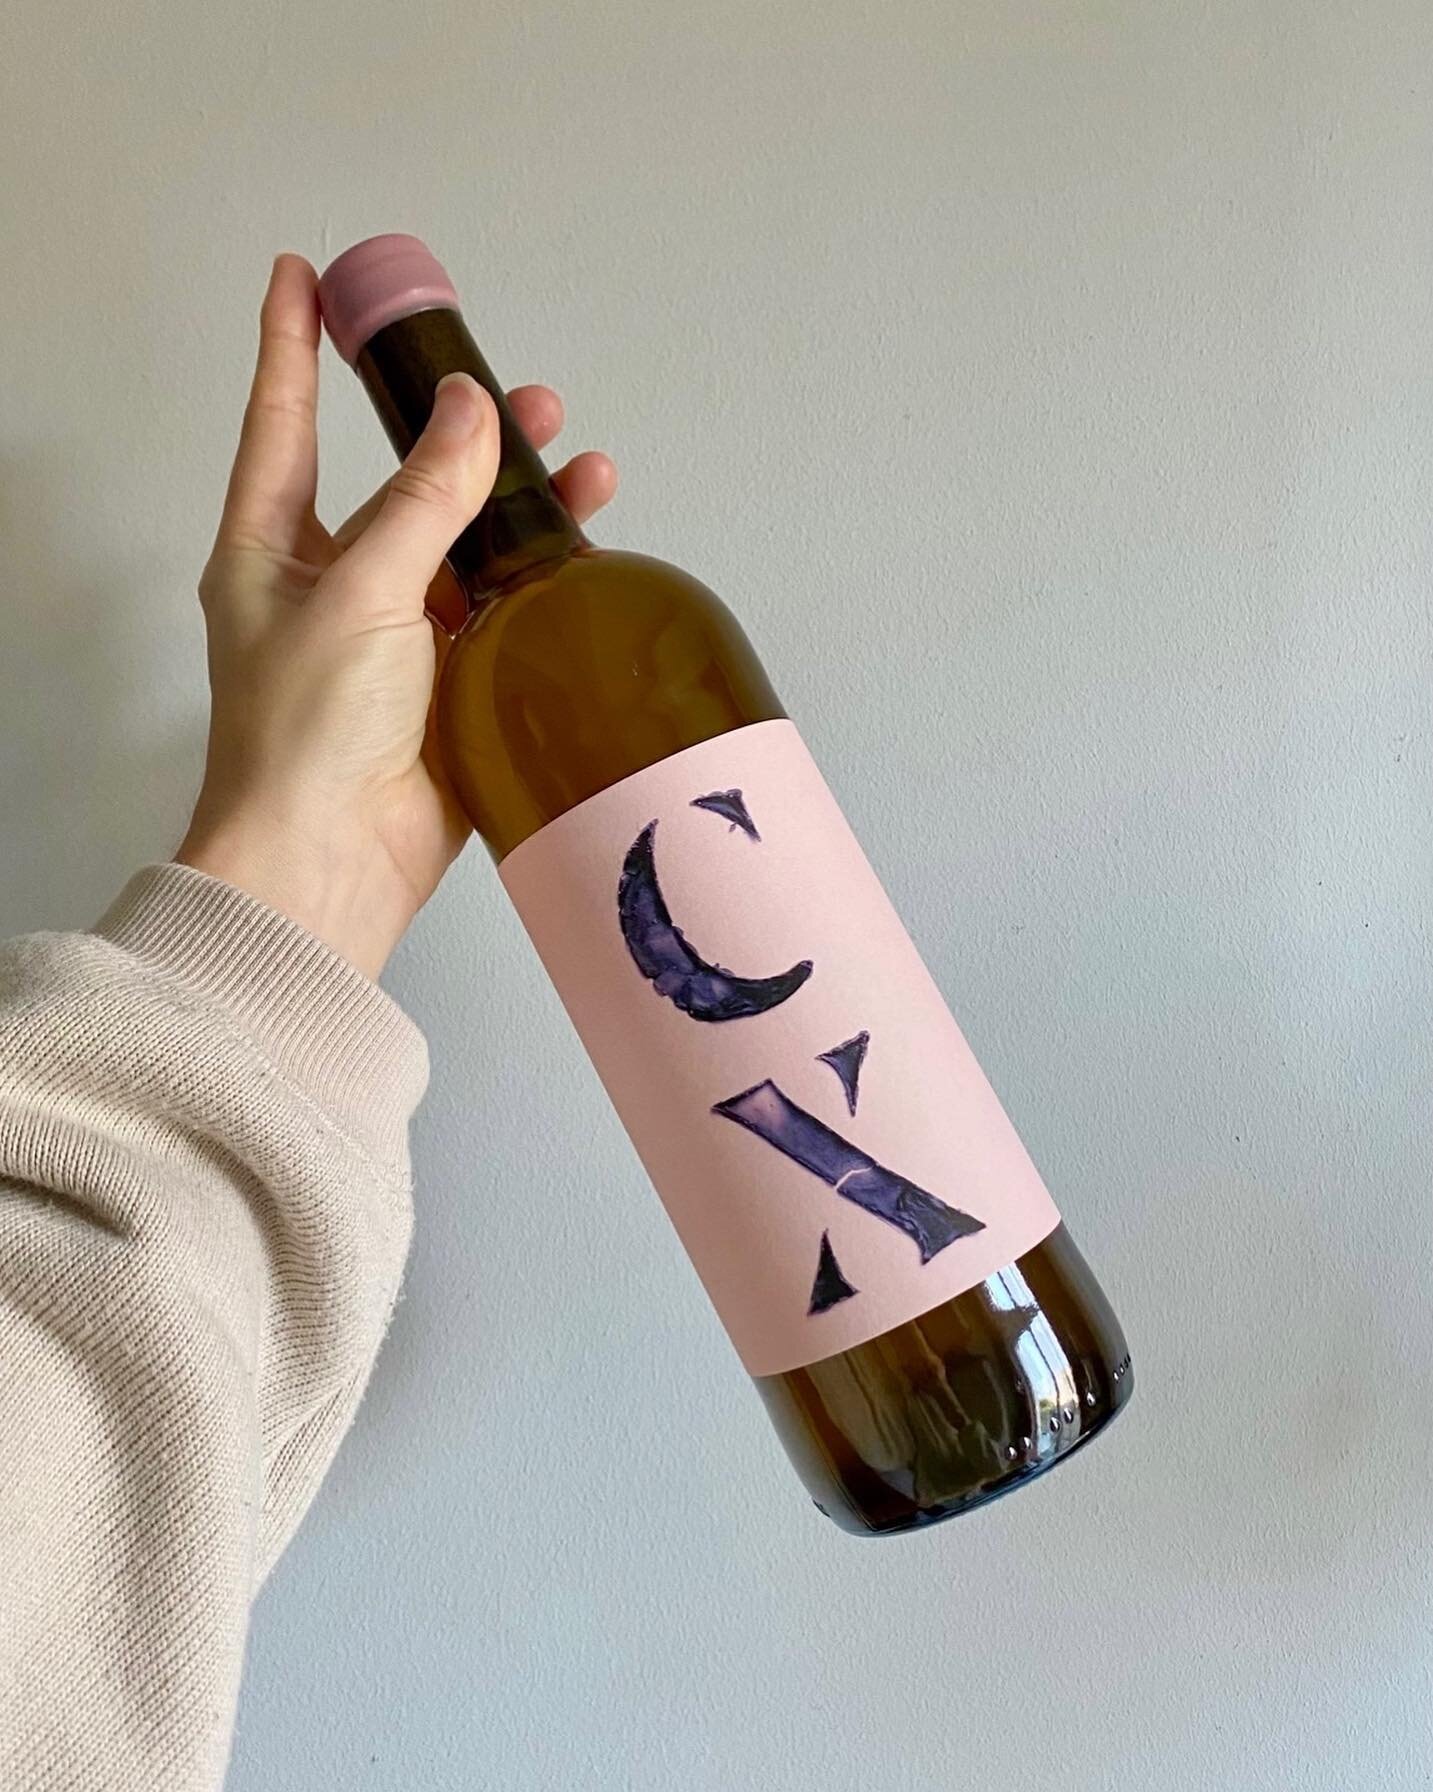 Partida Creus - CX 2018. Liven up these holiday days with this funky citrus-y orange wine. CX, standing for it's varietal Cartoixa Vermell, or better known as xarel&middot;lo rojo, is on the skins for 90 days. Bursting with grapefruit (we see you wit